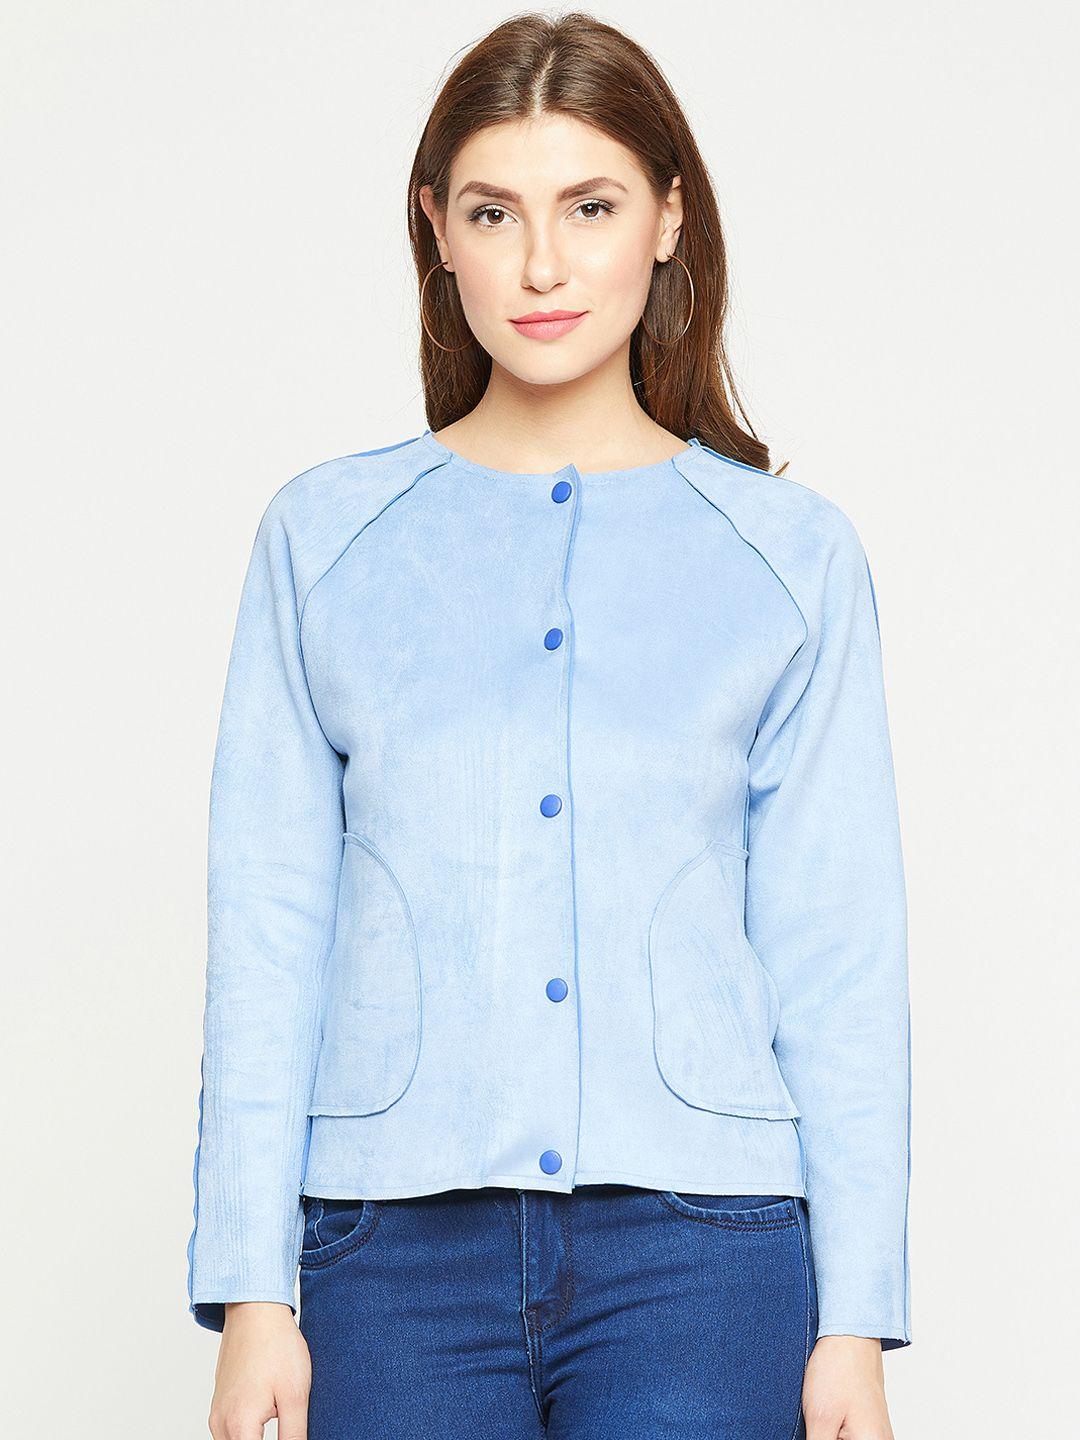 marie claire women turquoise blue solid suede tailored jacket